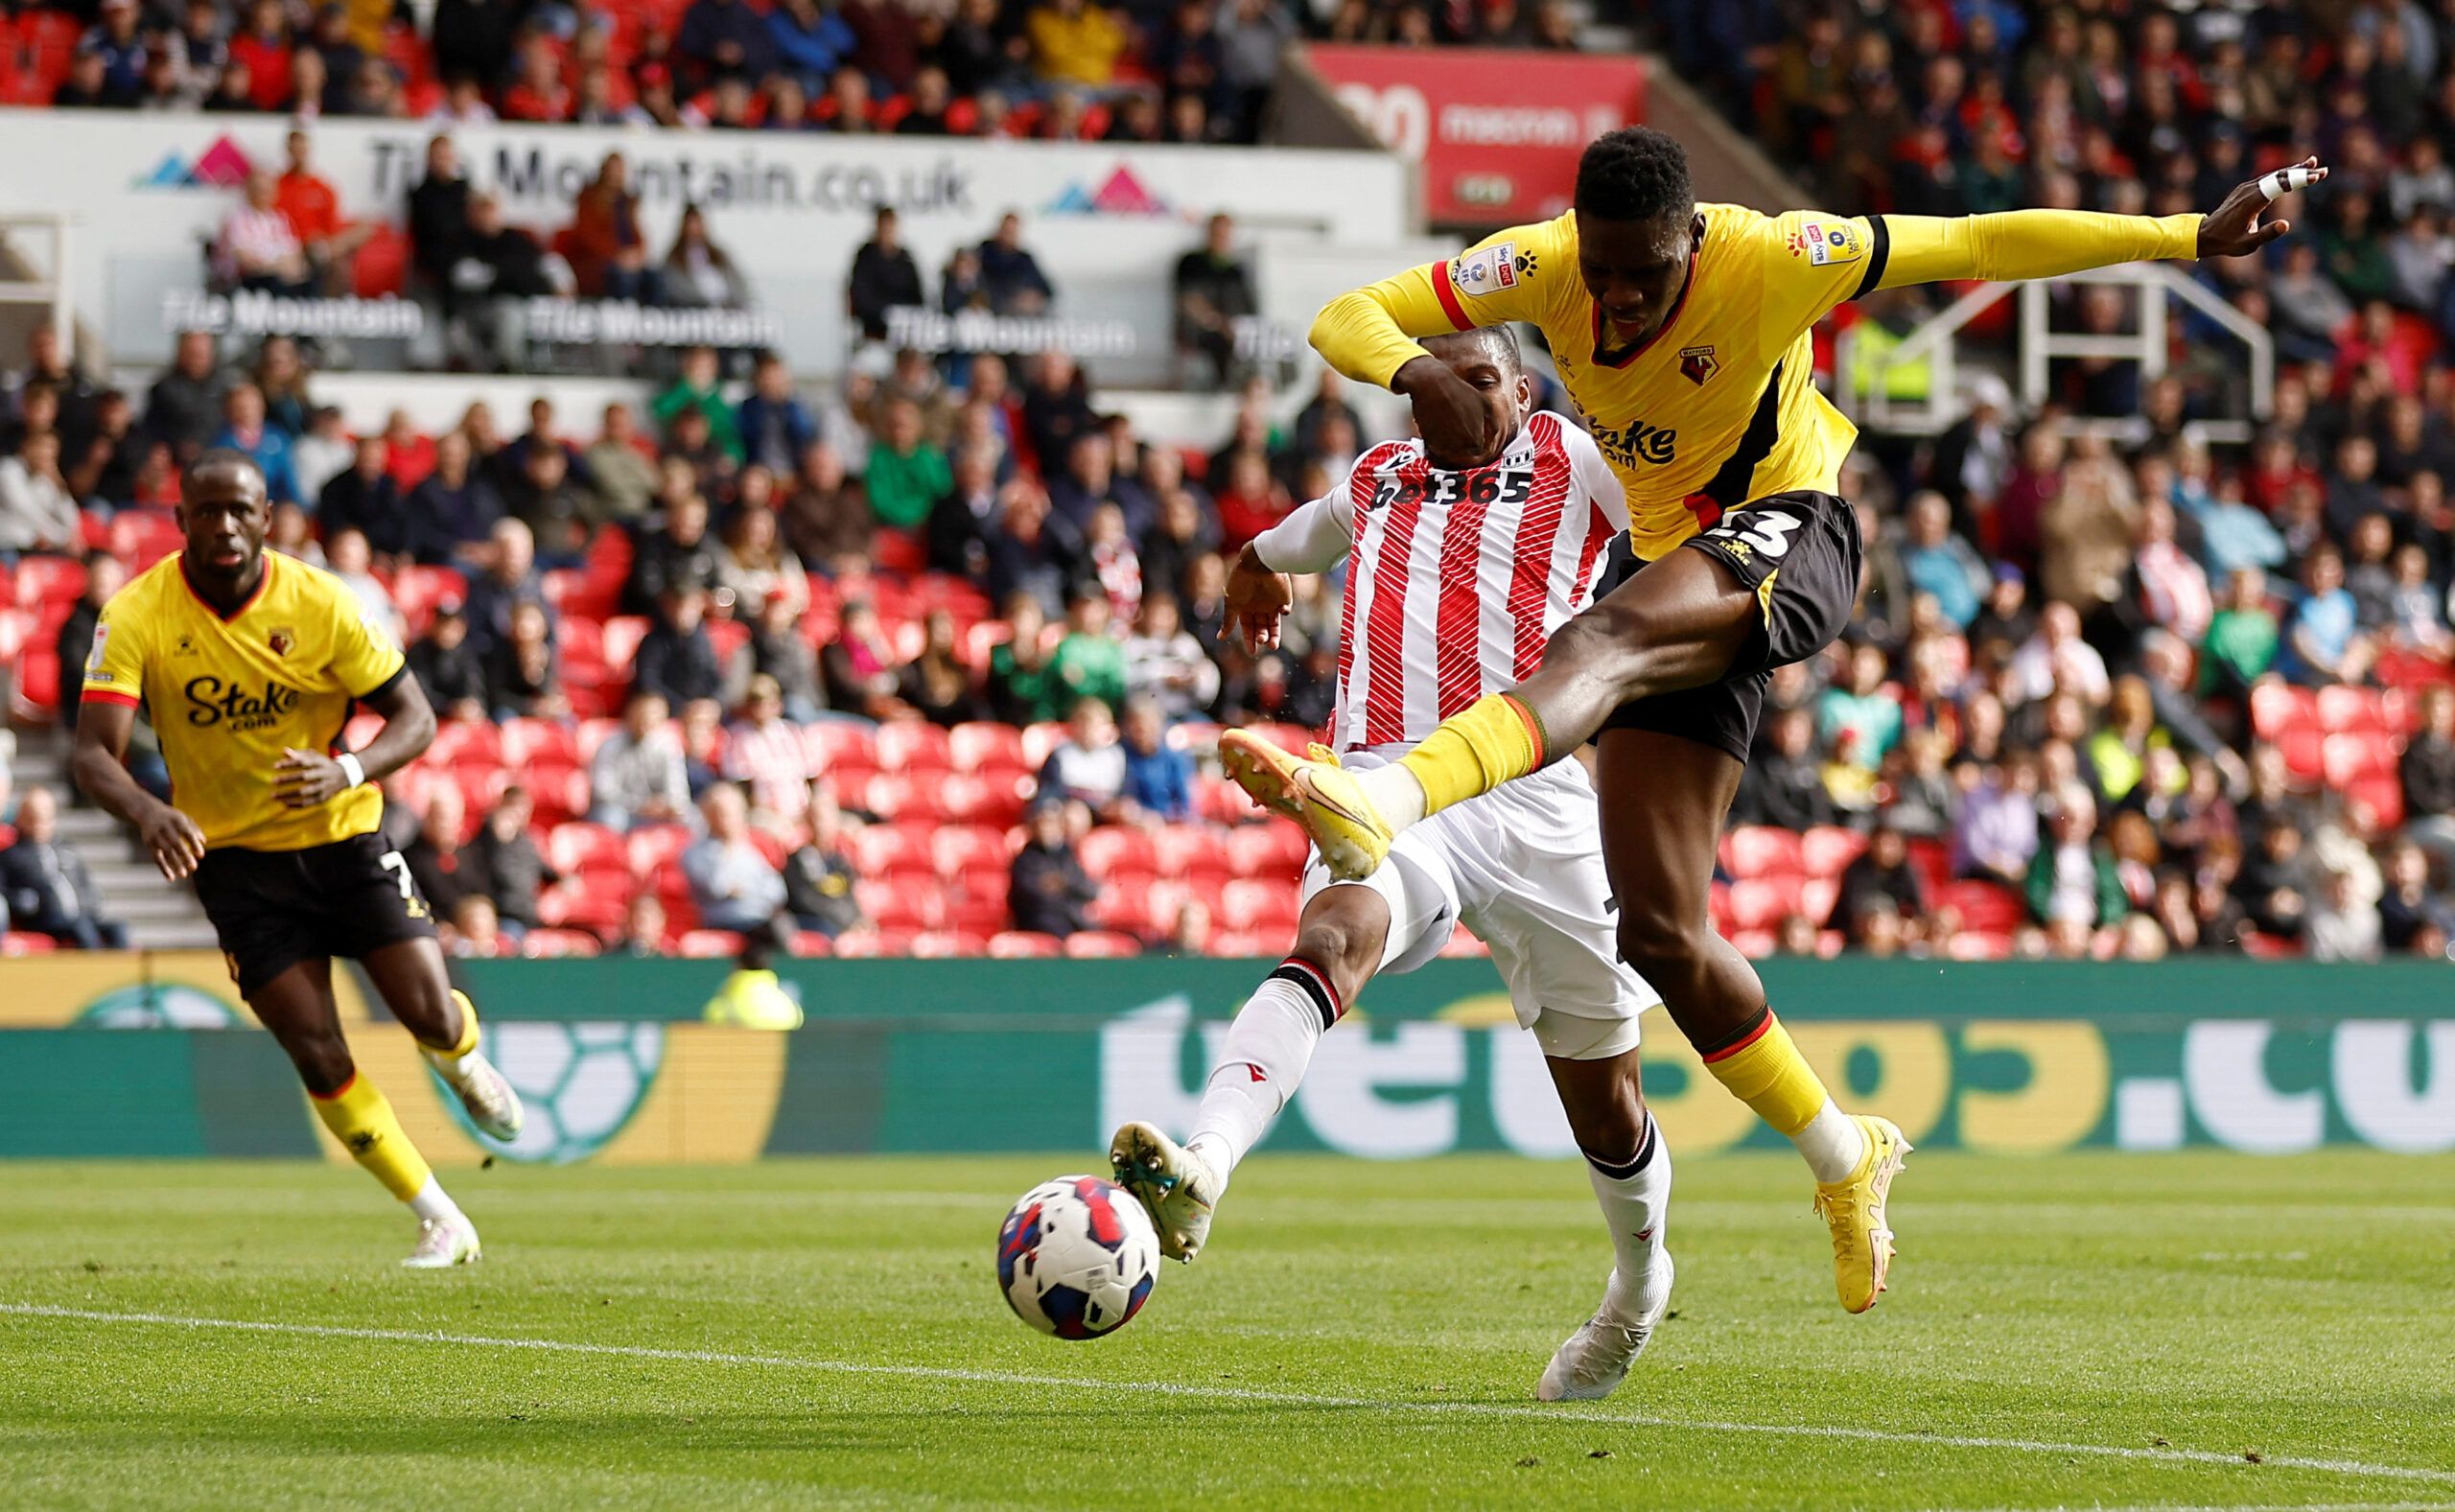 Soccer Football - Championship - Stoke City v Watford - bet365 Stadium, Stoke-on-Trent, Britain - October 2, 2022 Watford's Ismaila Sarr shoots at goal  Action Images/Jason Cairnduff  EDITORIAL USE ONLY. No use with unauthorized audio, video, data, fixture lists, club/league logos or 